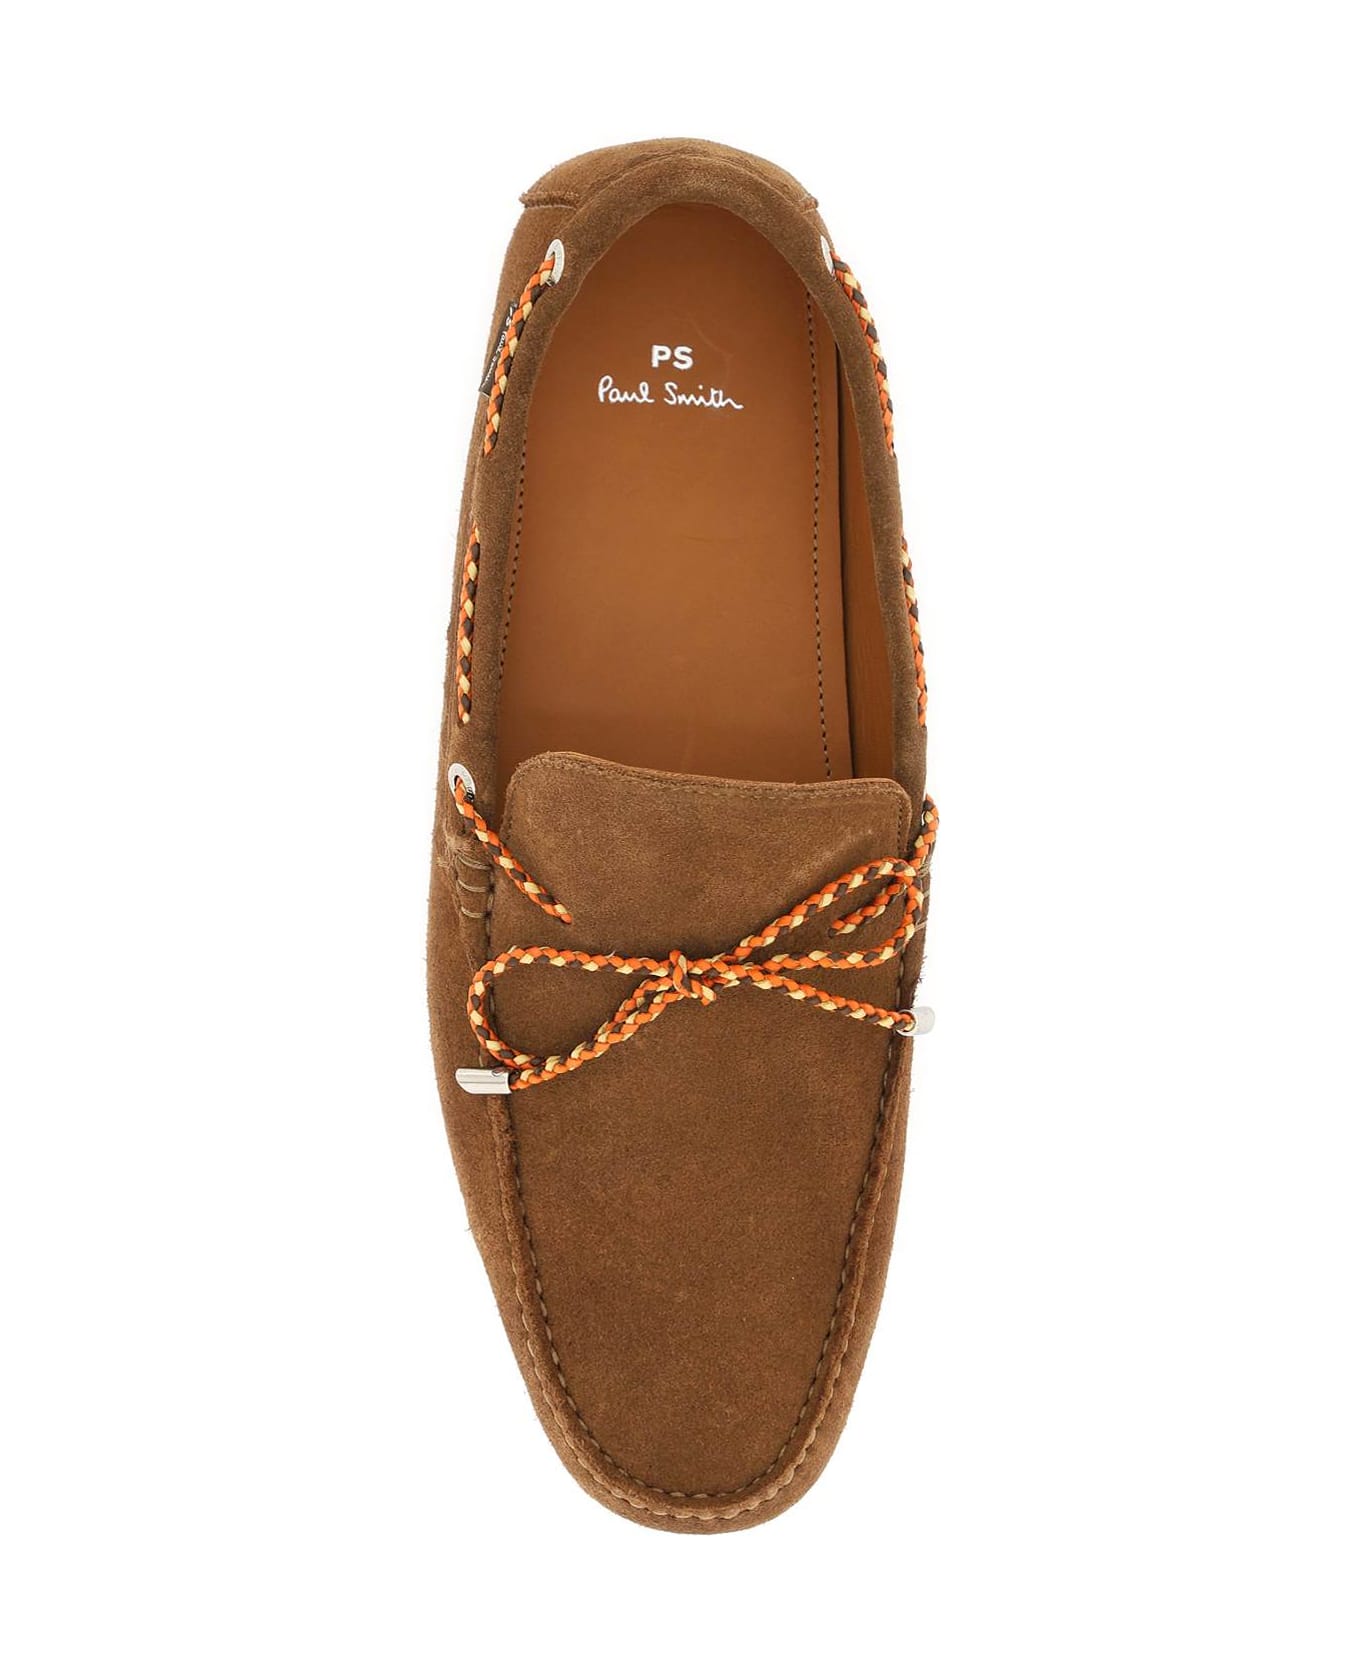 PS by Paul Smith Springfield Suede Loafers - TAN (Brown)